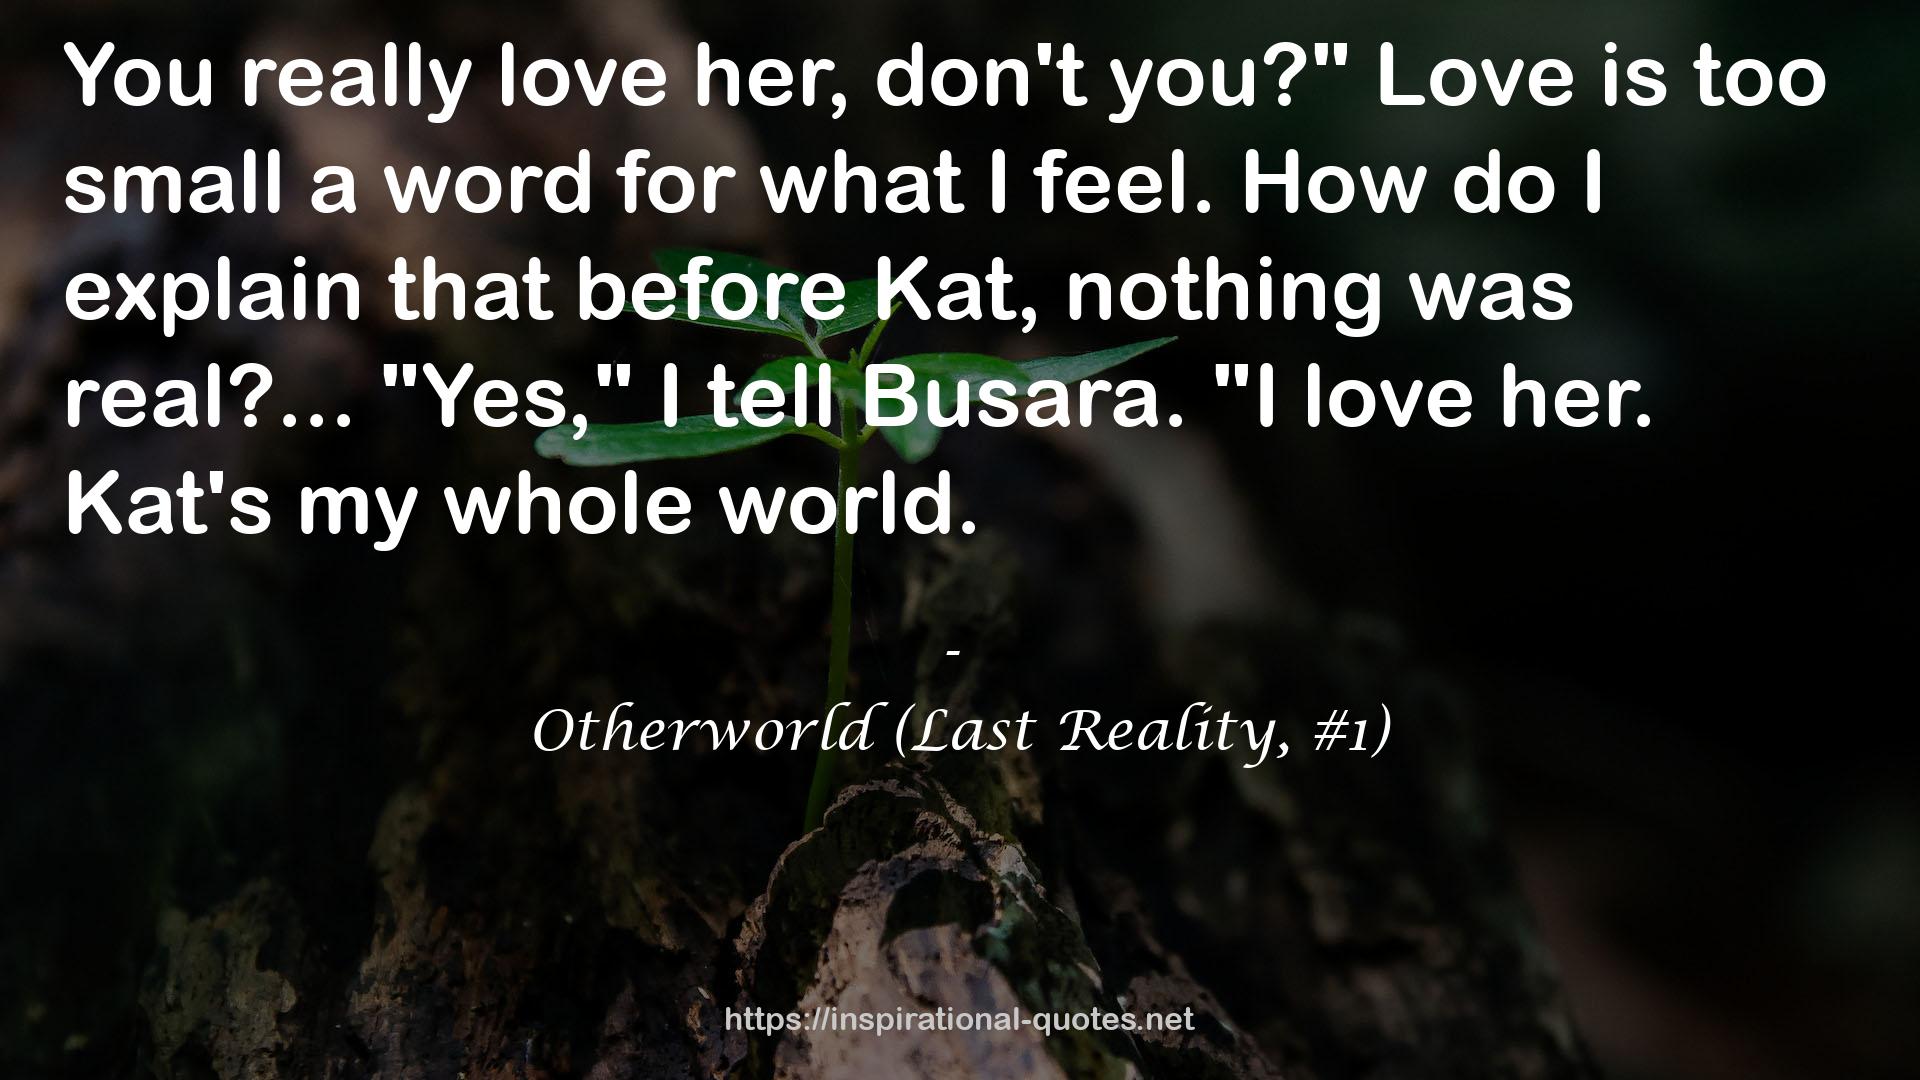 Otherworld (Last Reality, #1) QUOTES